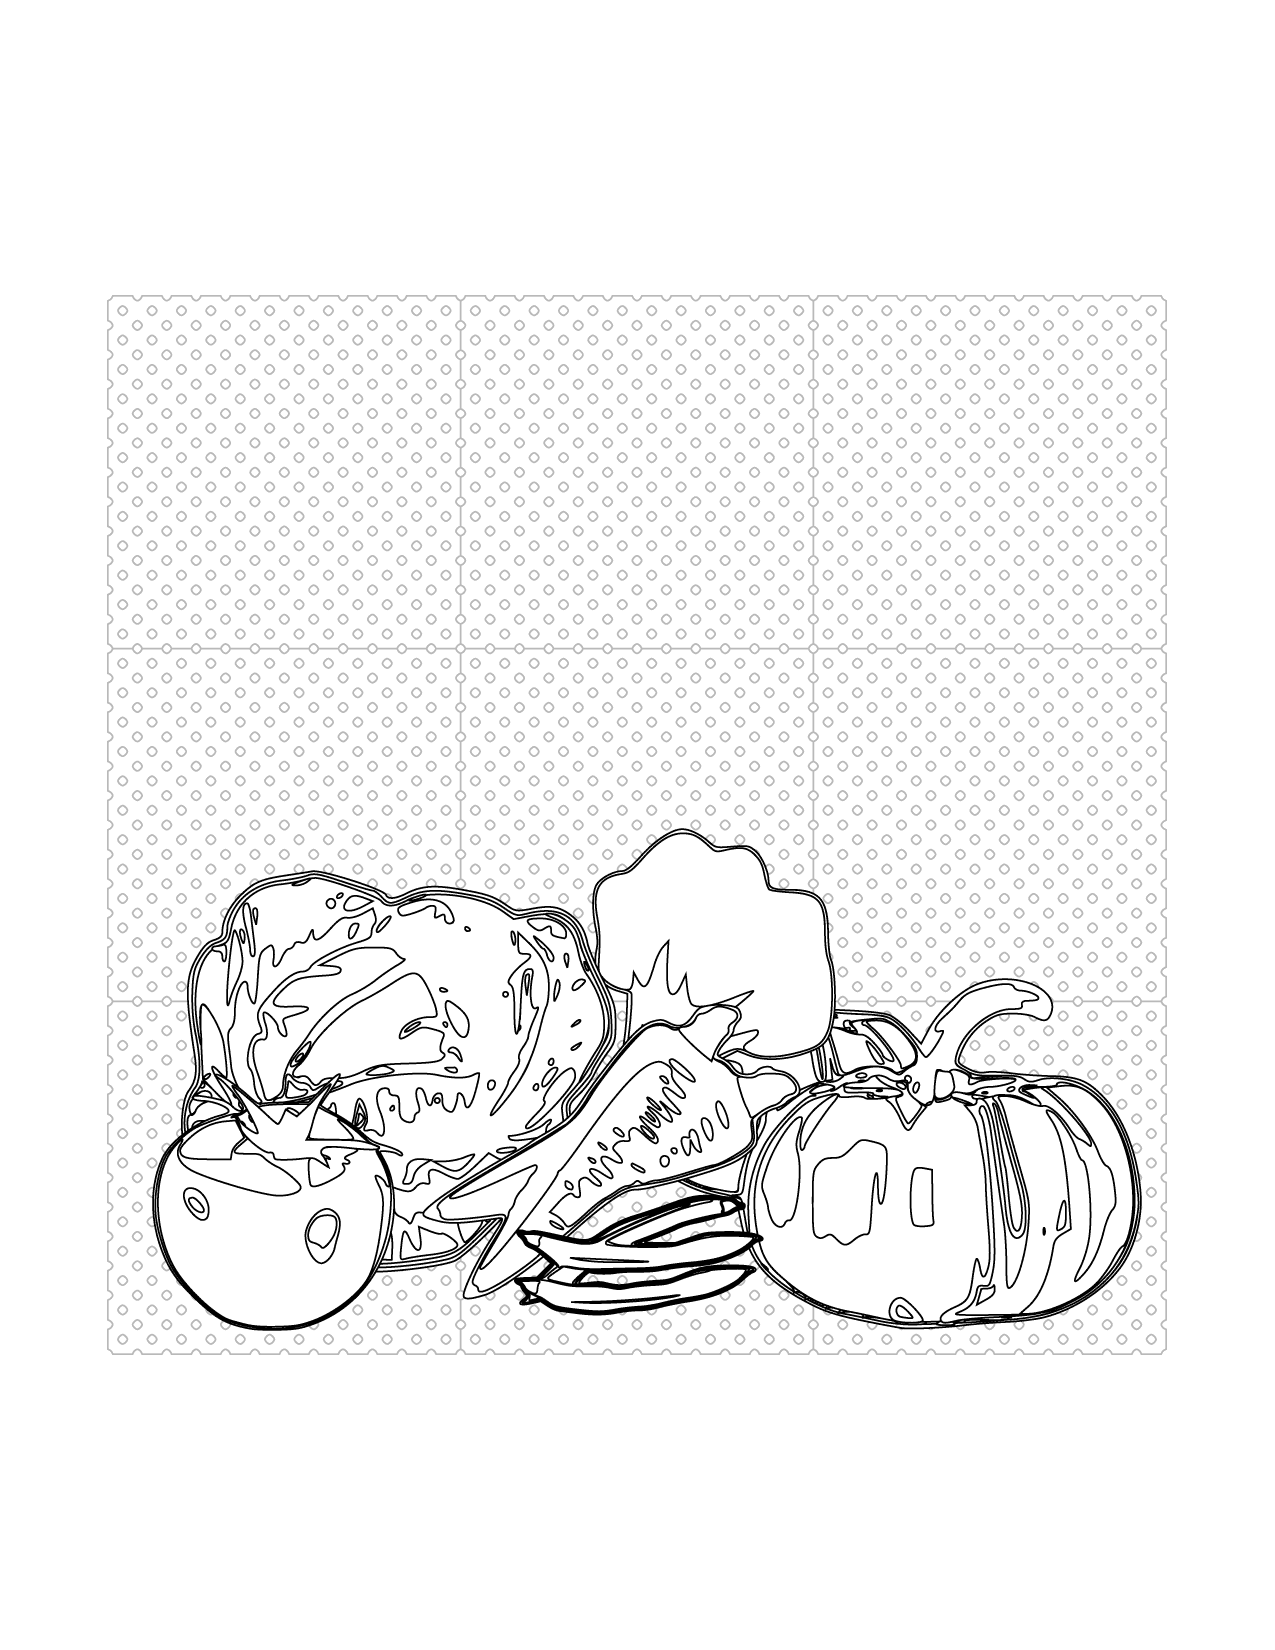 Group Of Vegetables Coloring Page